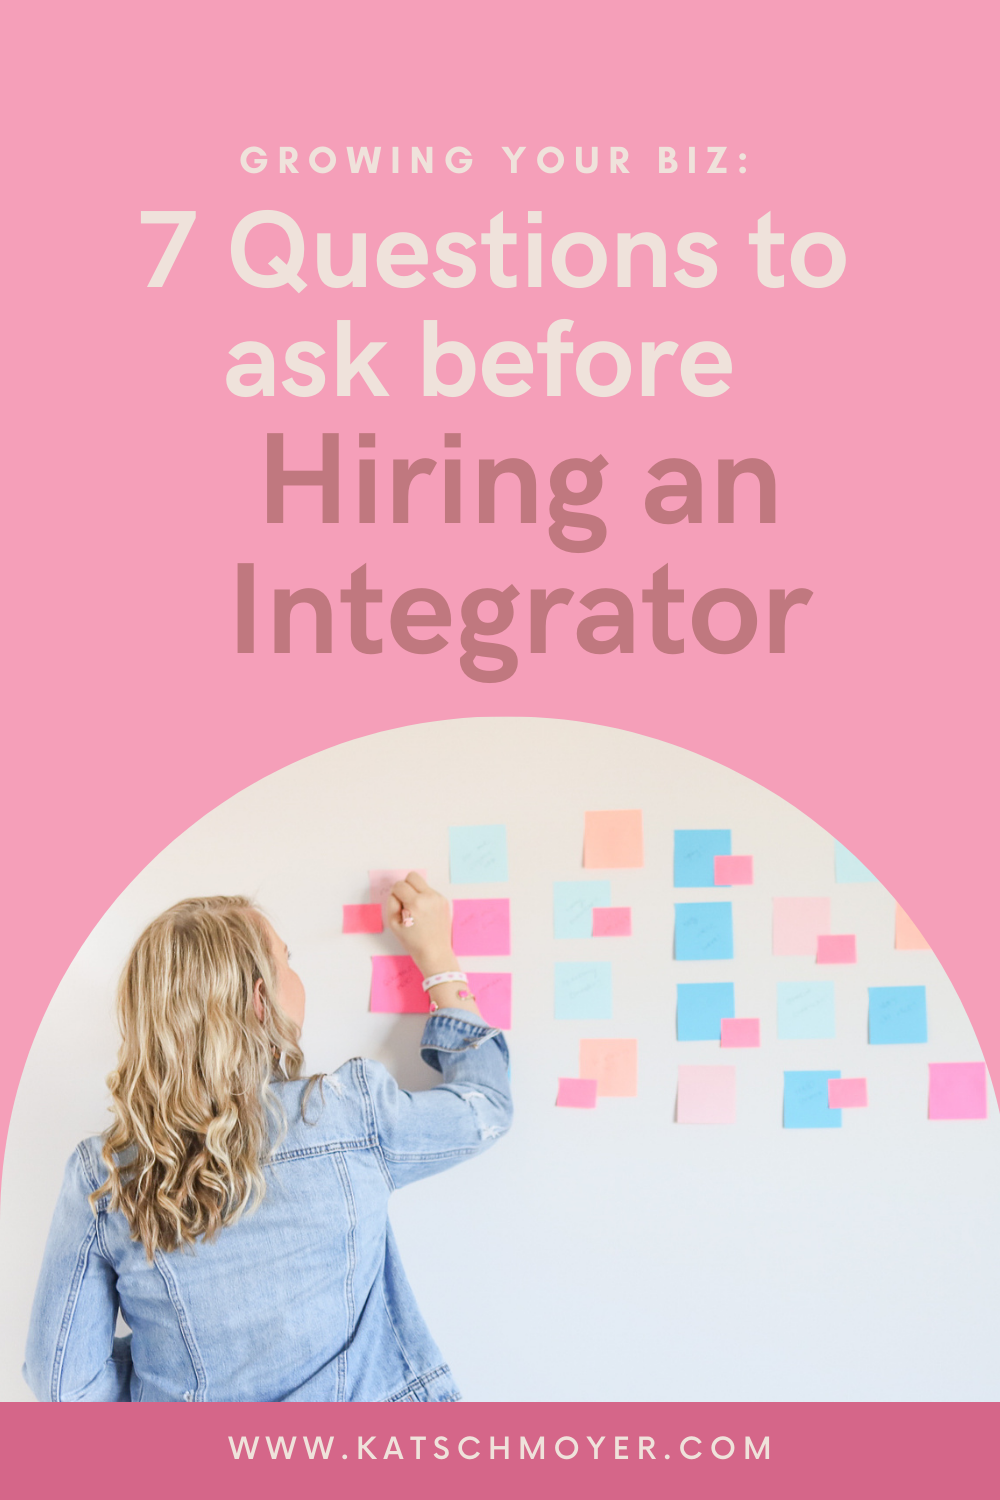 7 Questions to Ask Before Hiring an Integrator as a Small Business Owner: shared by integrator and business coach Kat Schmoyer